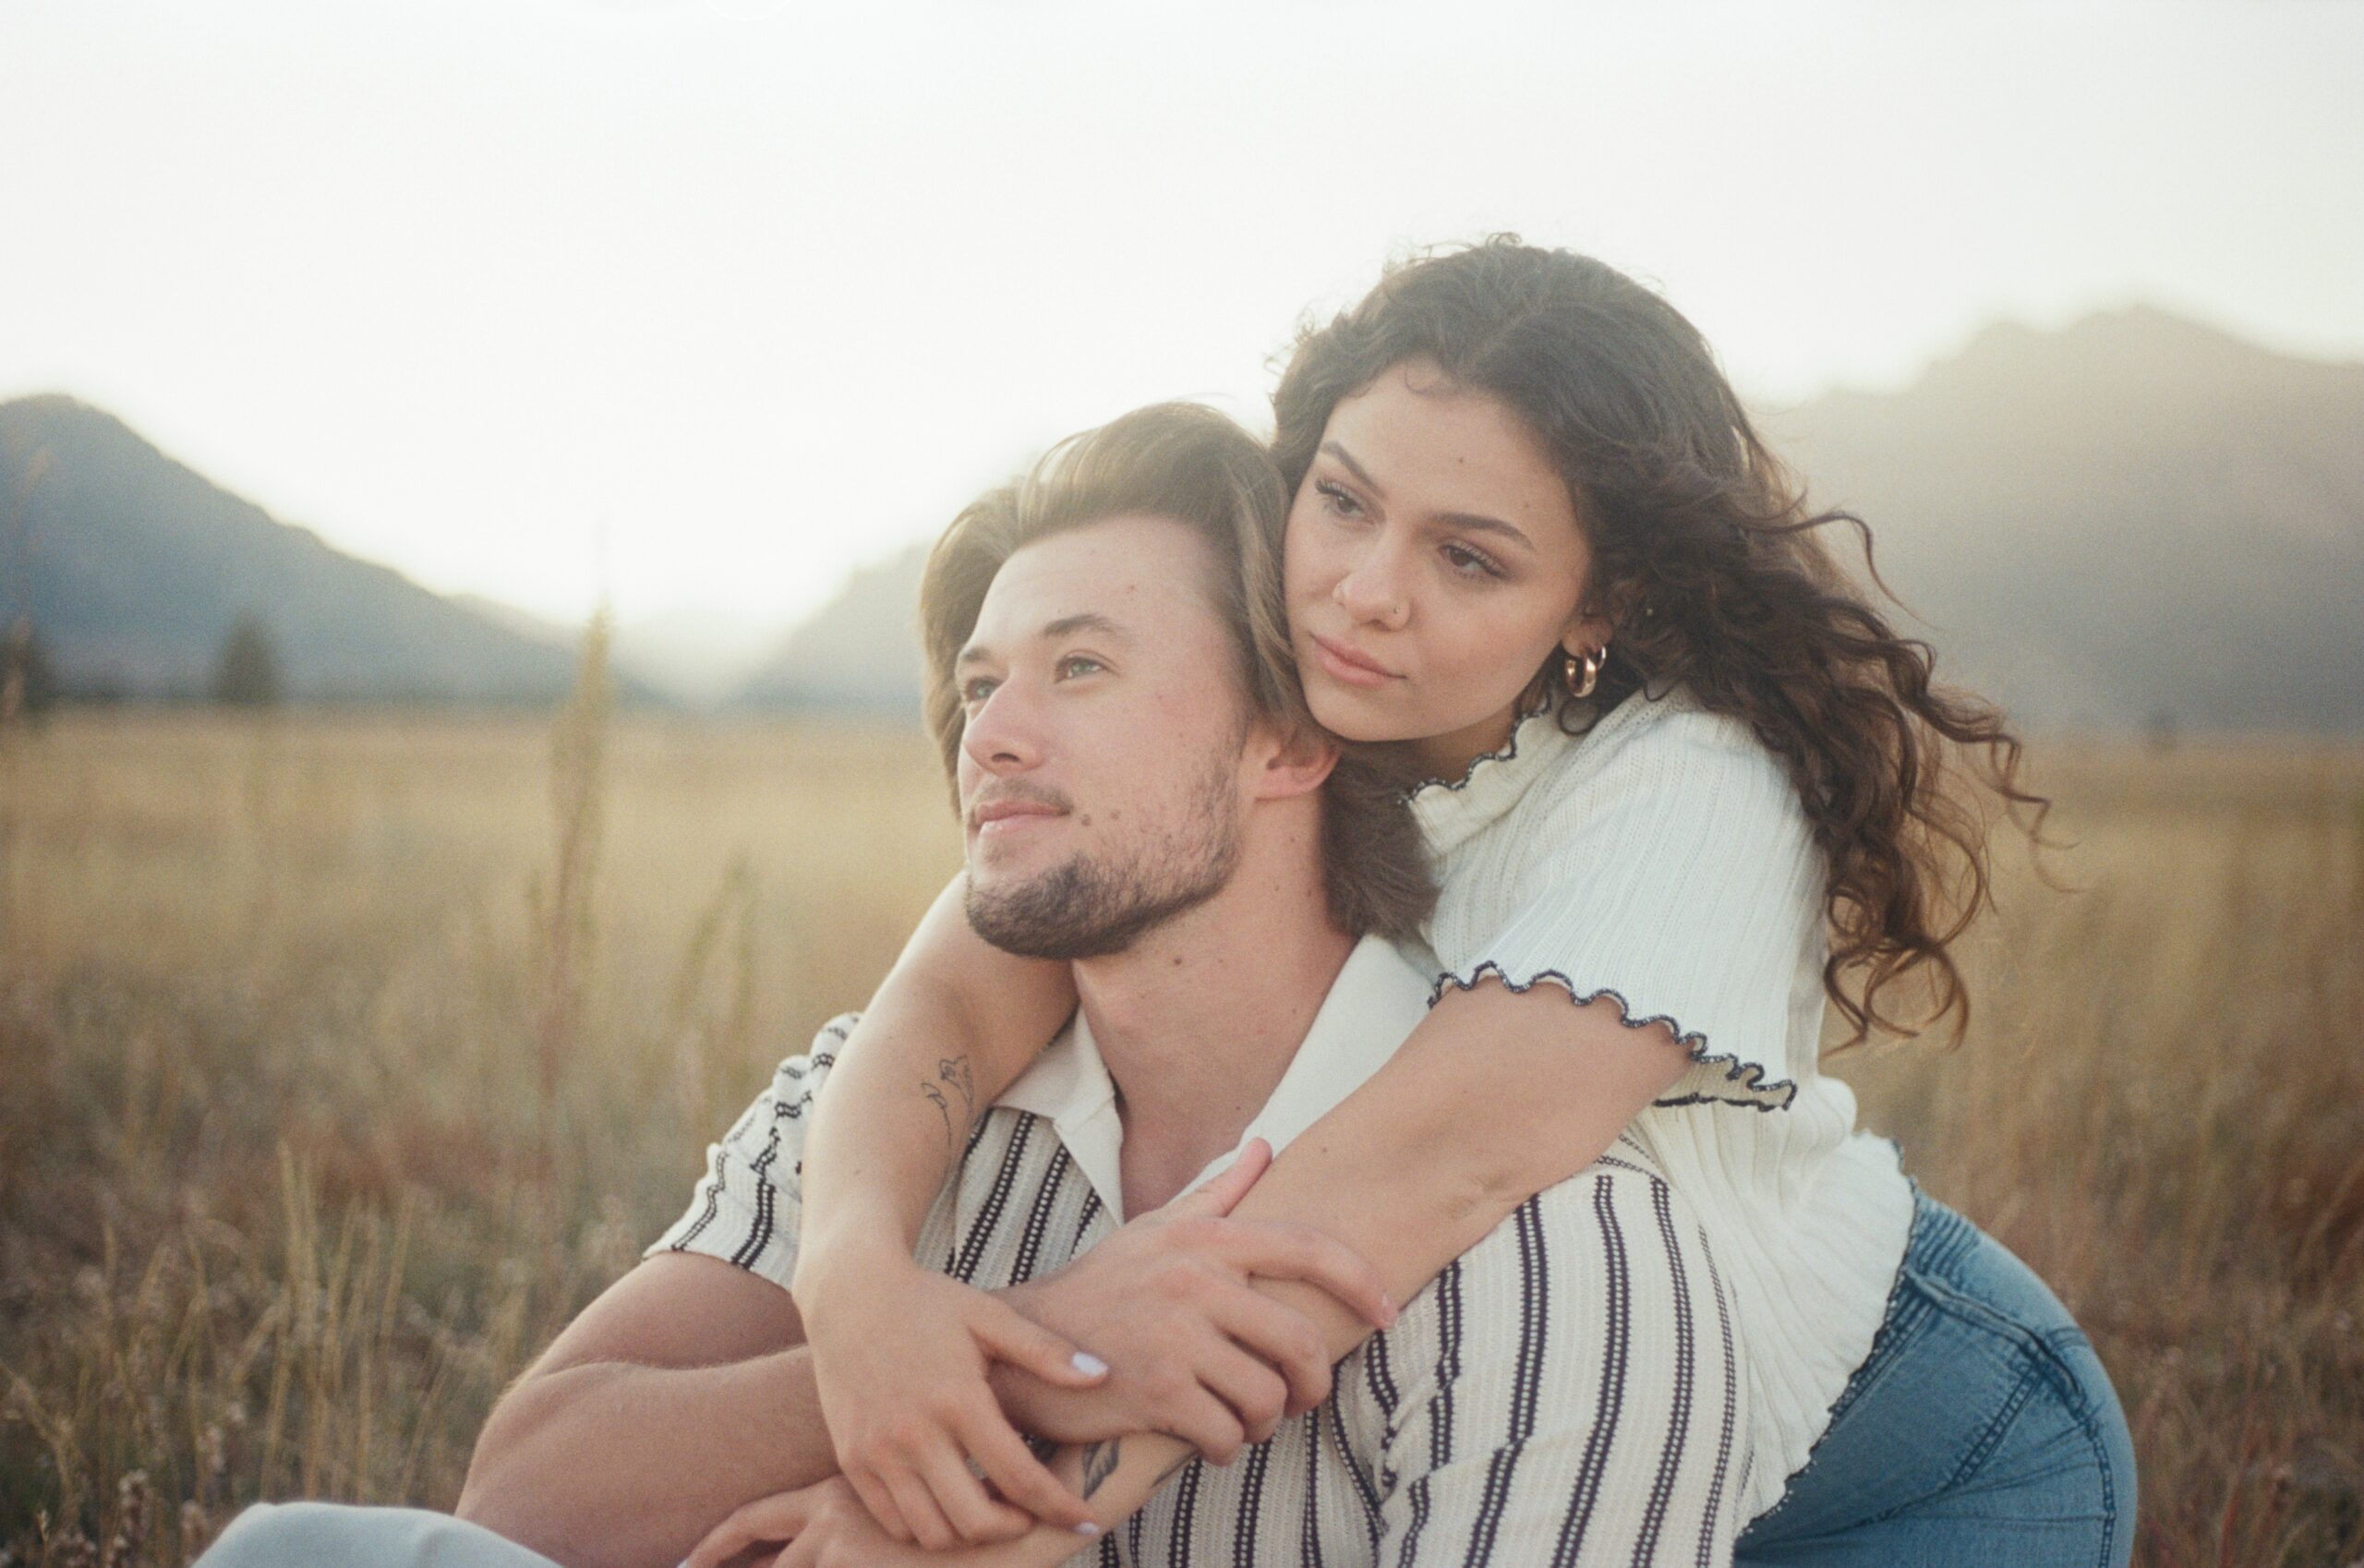 film photography of a woman holding her boyfriend from behind as they sit in a grass field 